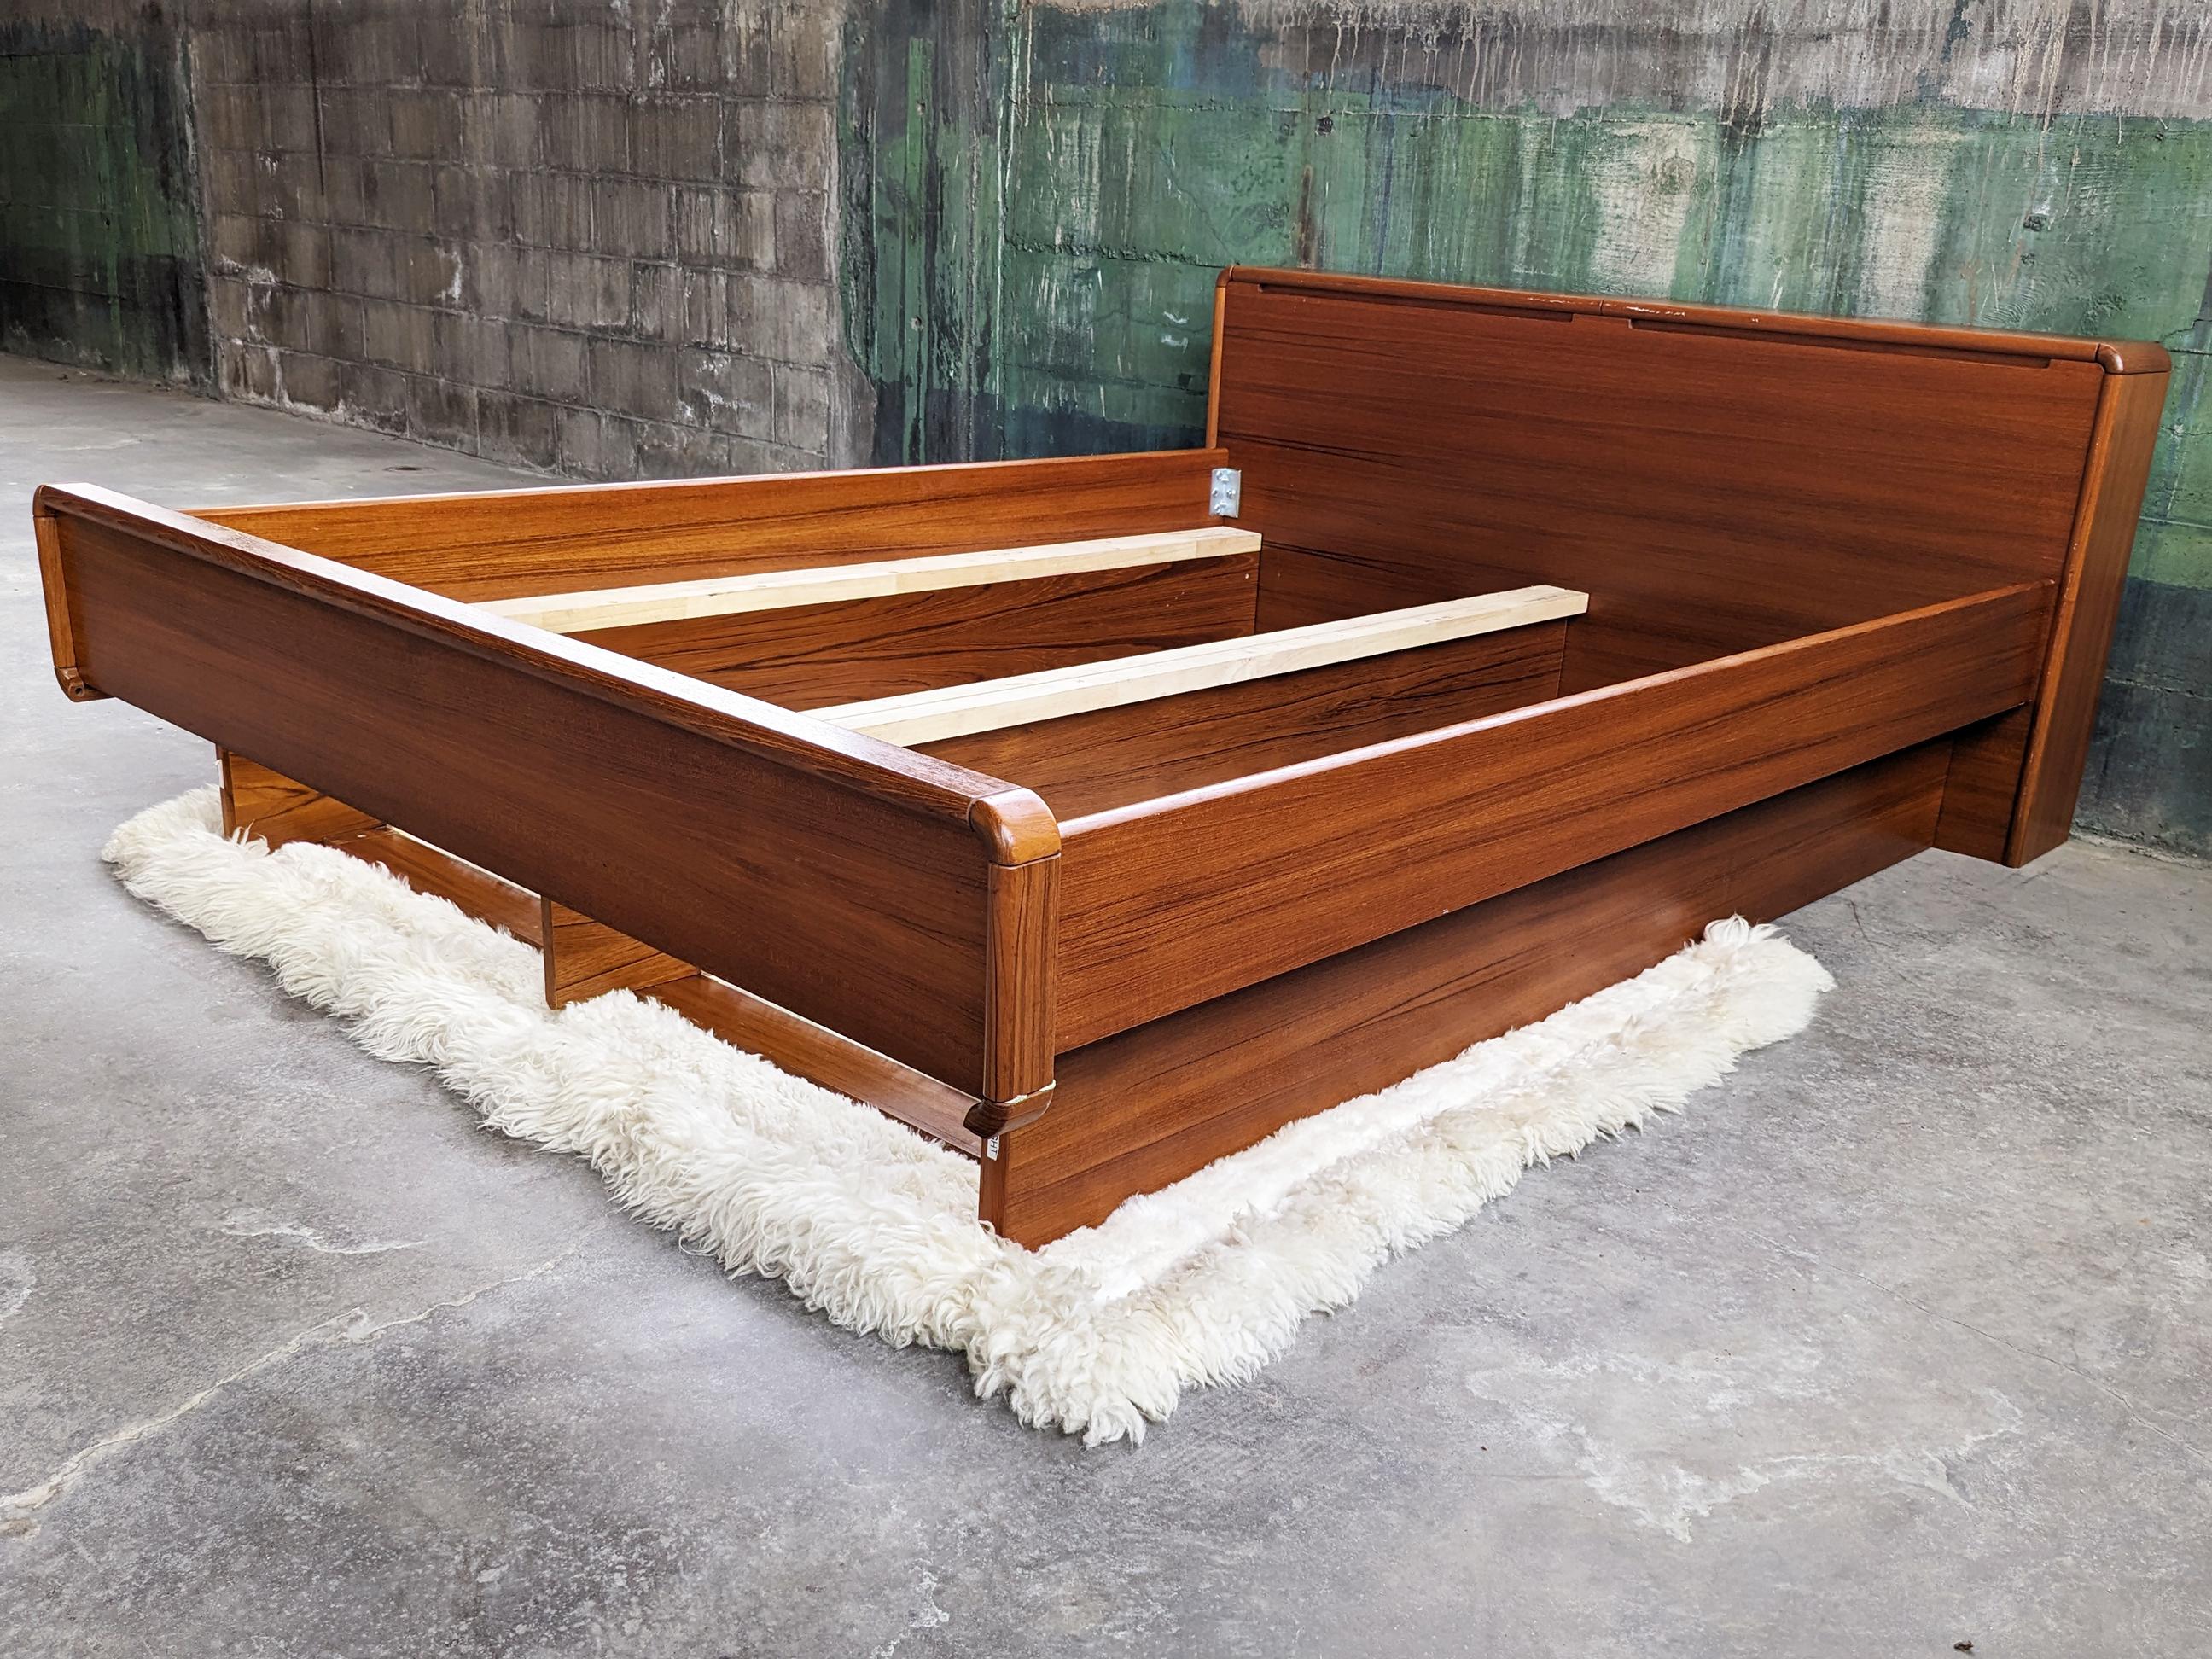 Very beautiful teak danish Queen bed with two pillow or extra linen storage compartments in the headboard + Two underneath drawers.

Optional** Additional matching end table, can be purchased separately. Inquire if interested, See image 3 for